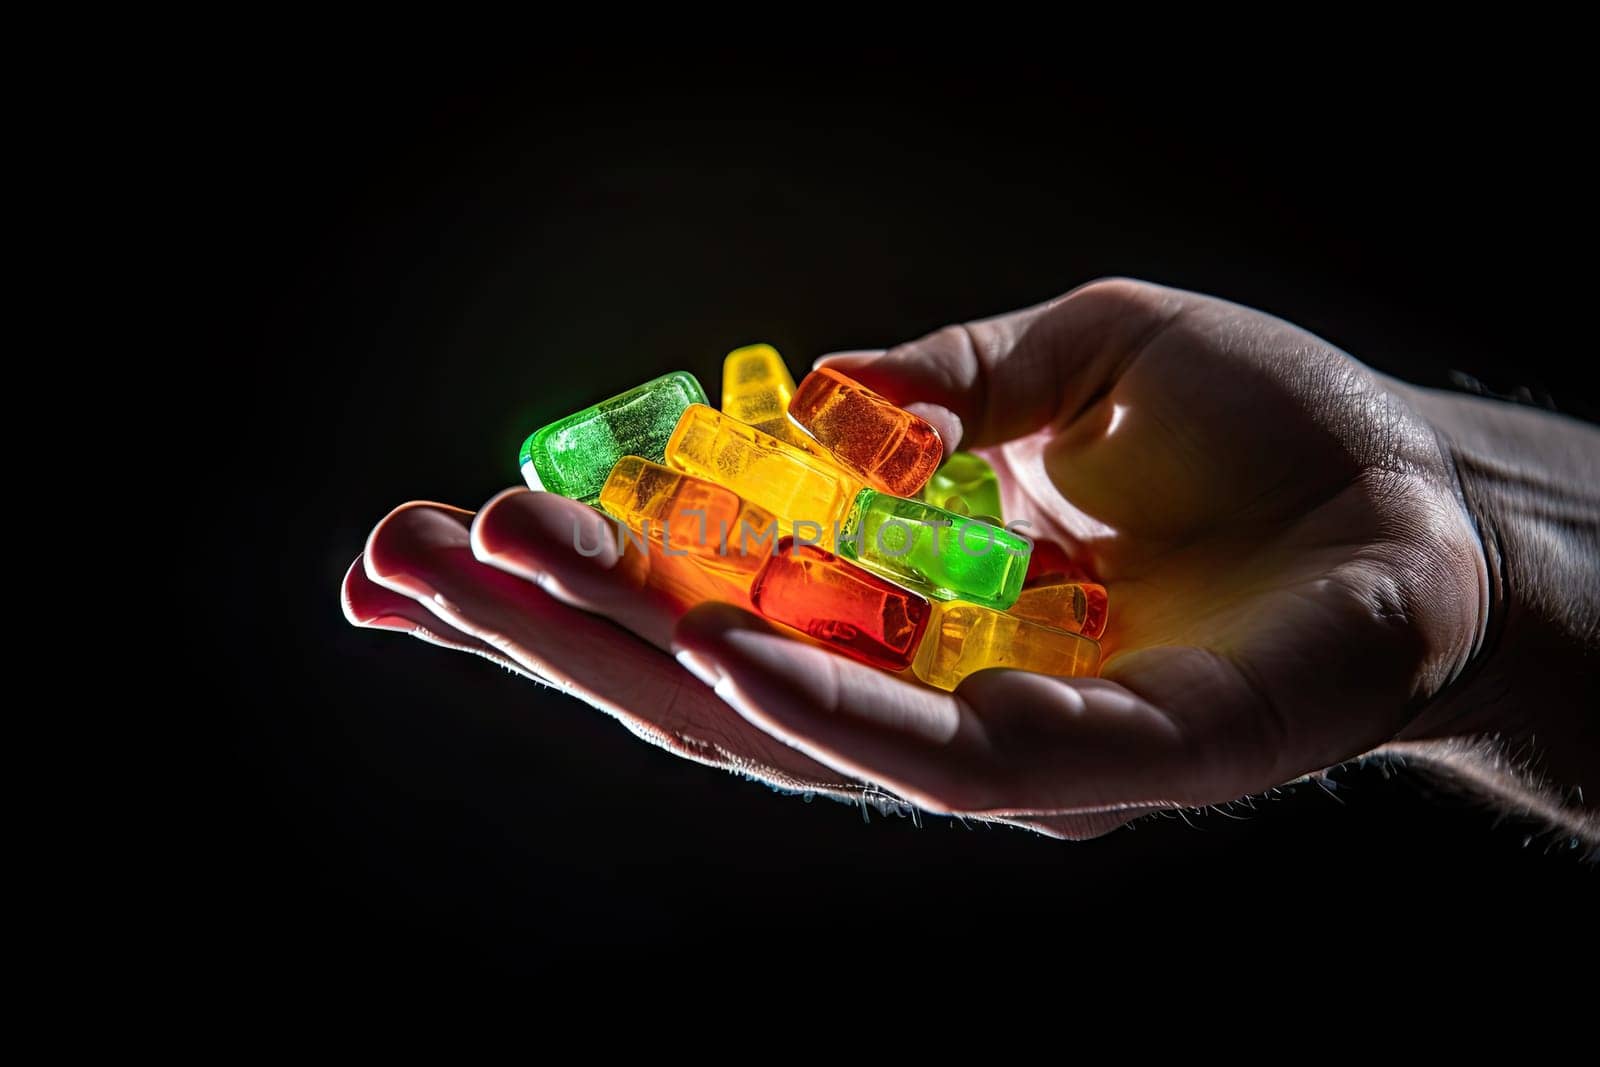 CBG Gummies. a person's hand holding several colored ice cubes in the image is on a black background and there are two fingers